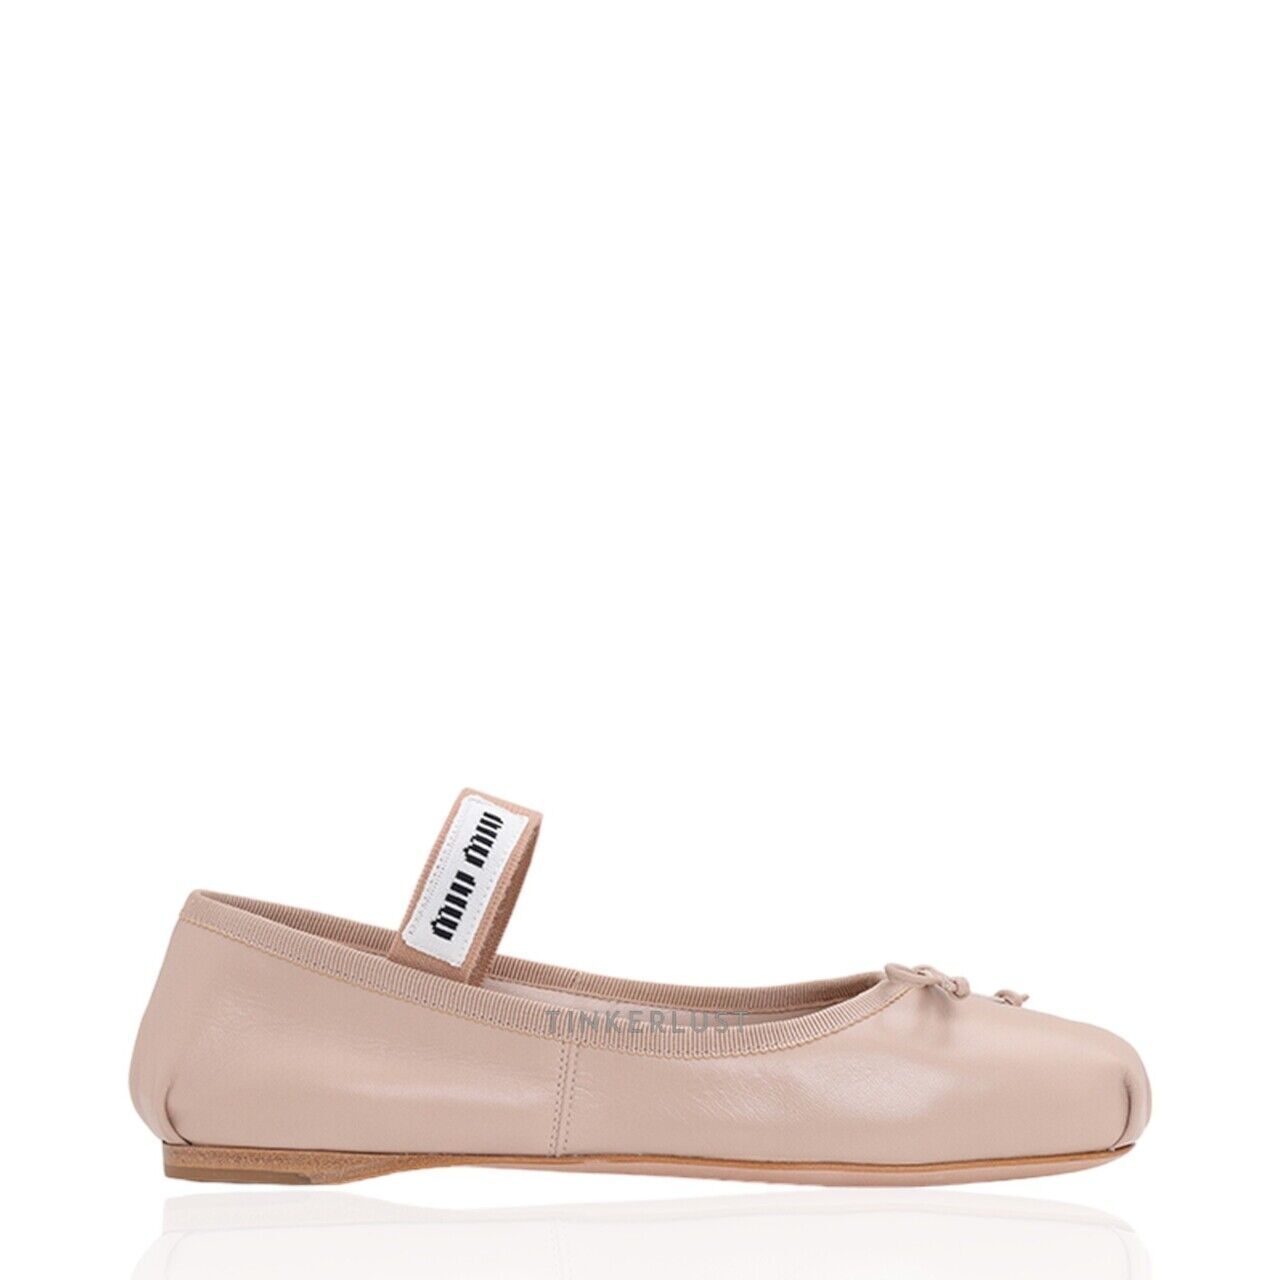 Miu Miu Bow Elastic Band Ballerina in Water Lily Leather with Logo